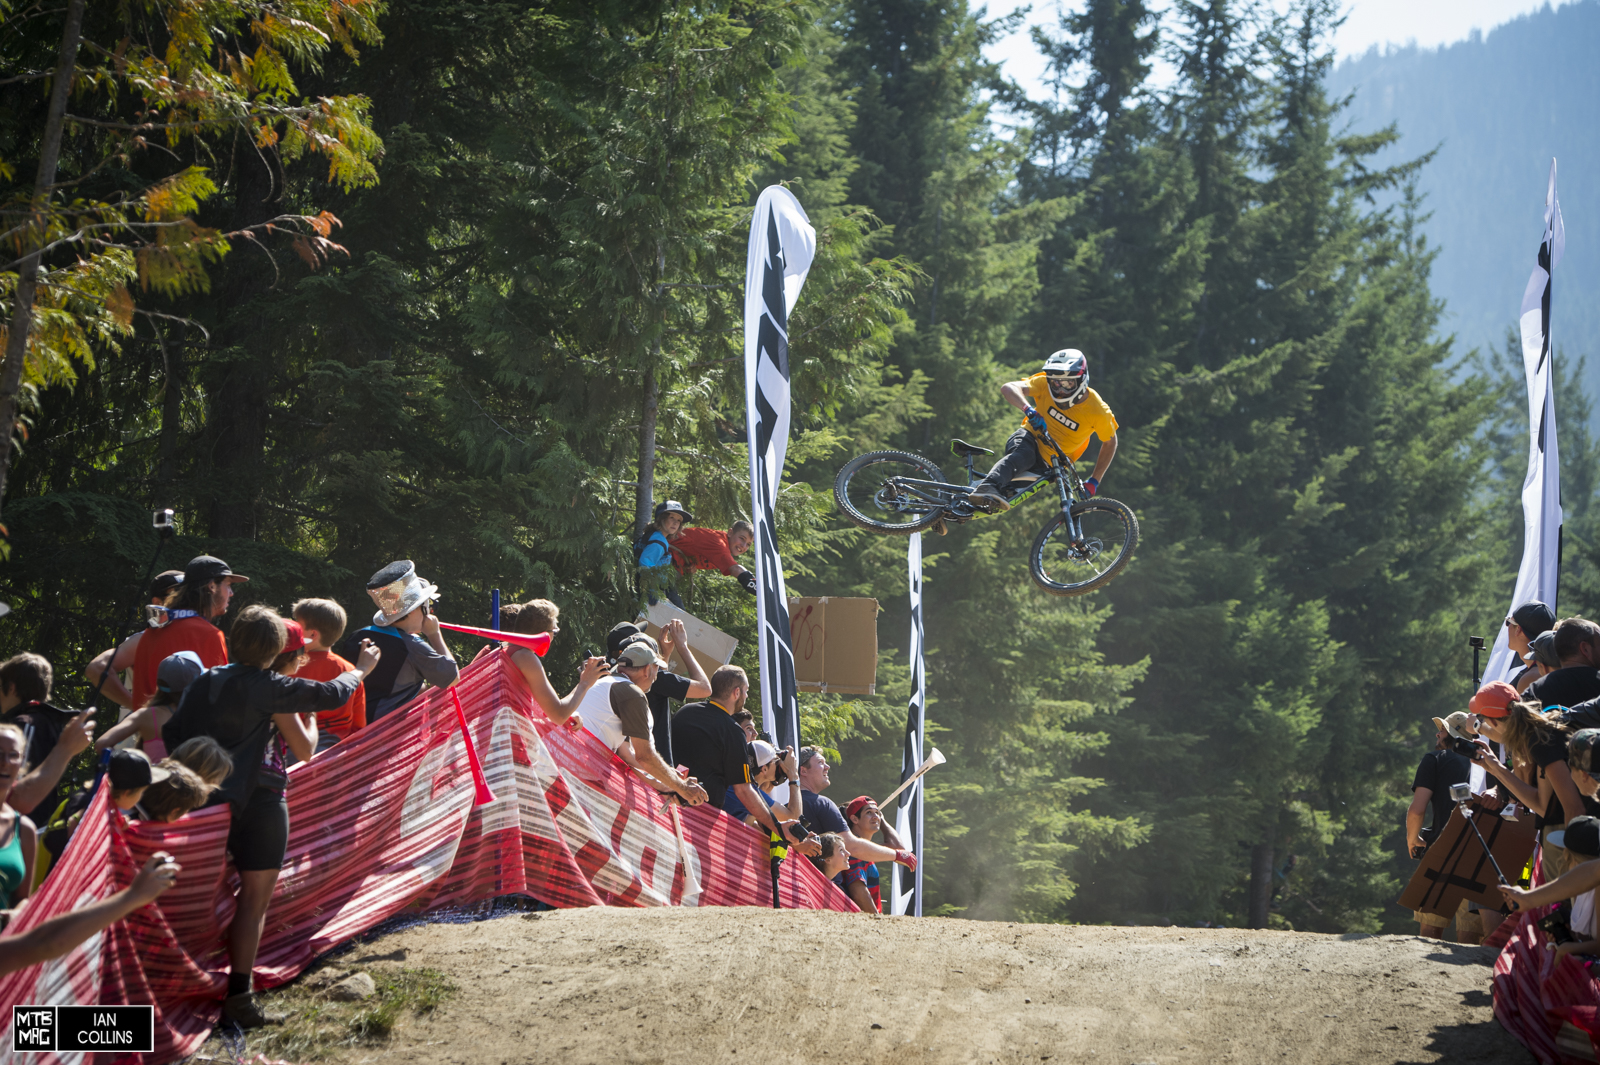 Coming all the way from Italy, Torquato Testa made the finals.  He'll be riding in Joyride as well.